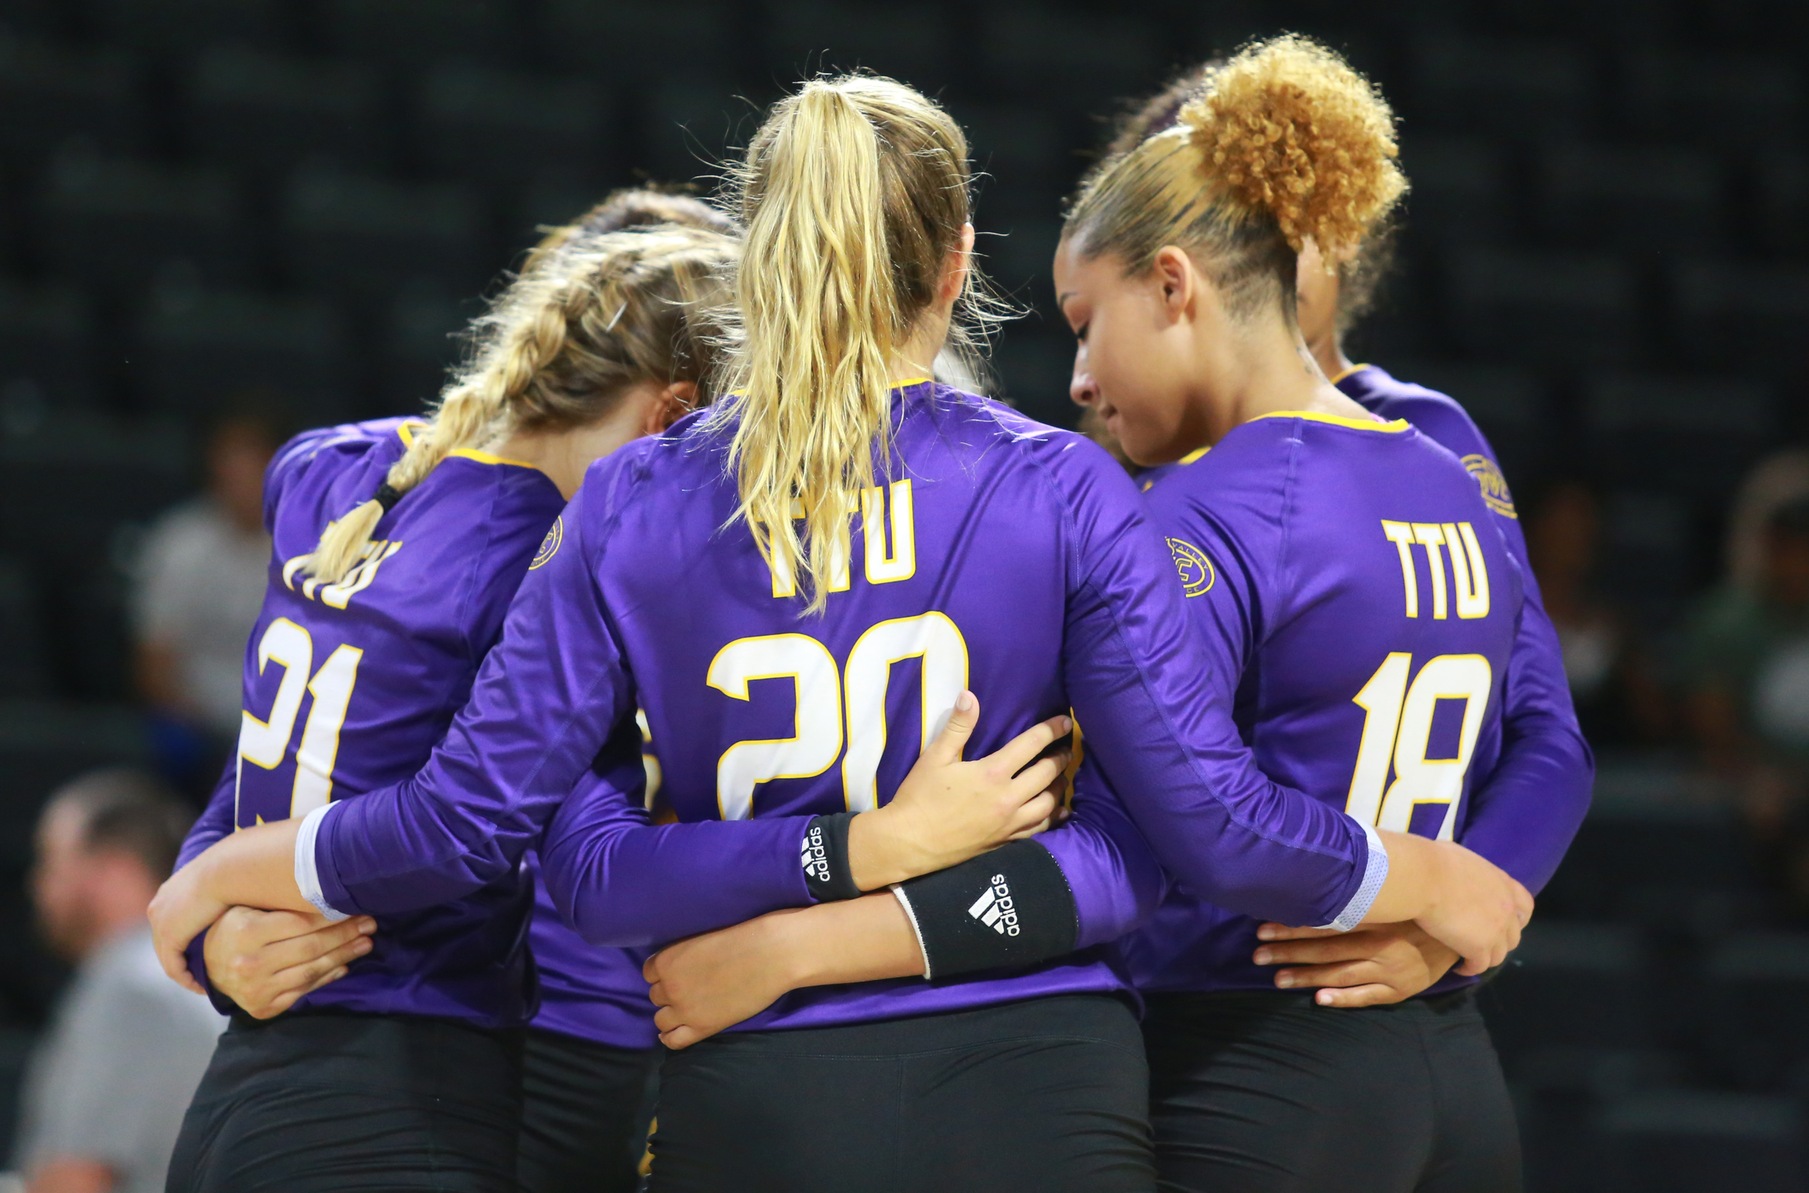 Tech volleyball offers sneak preview at Purple and Gold scrimmages